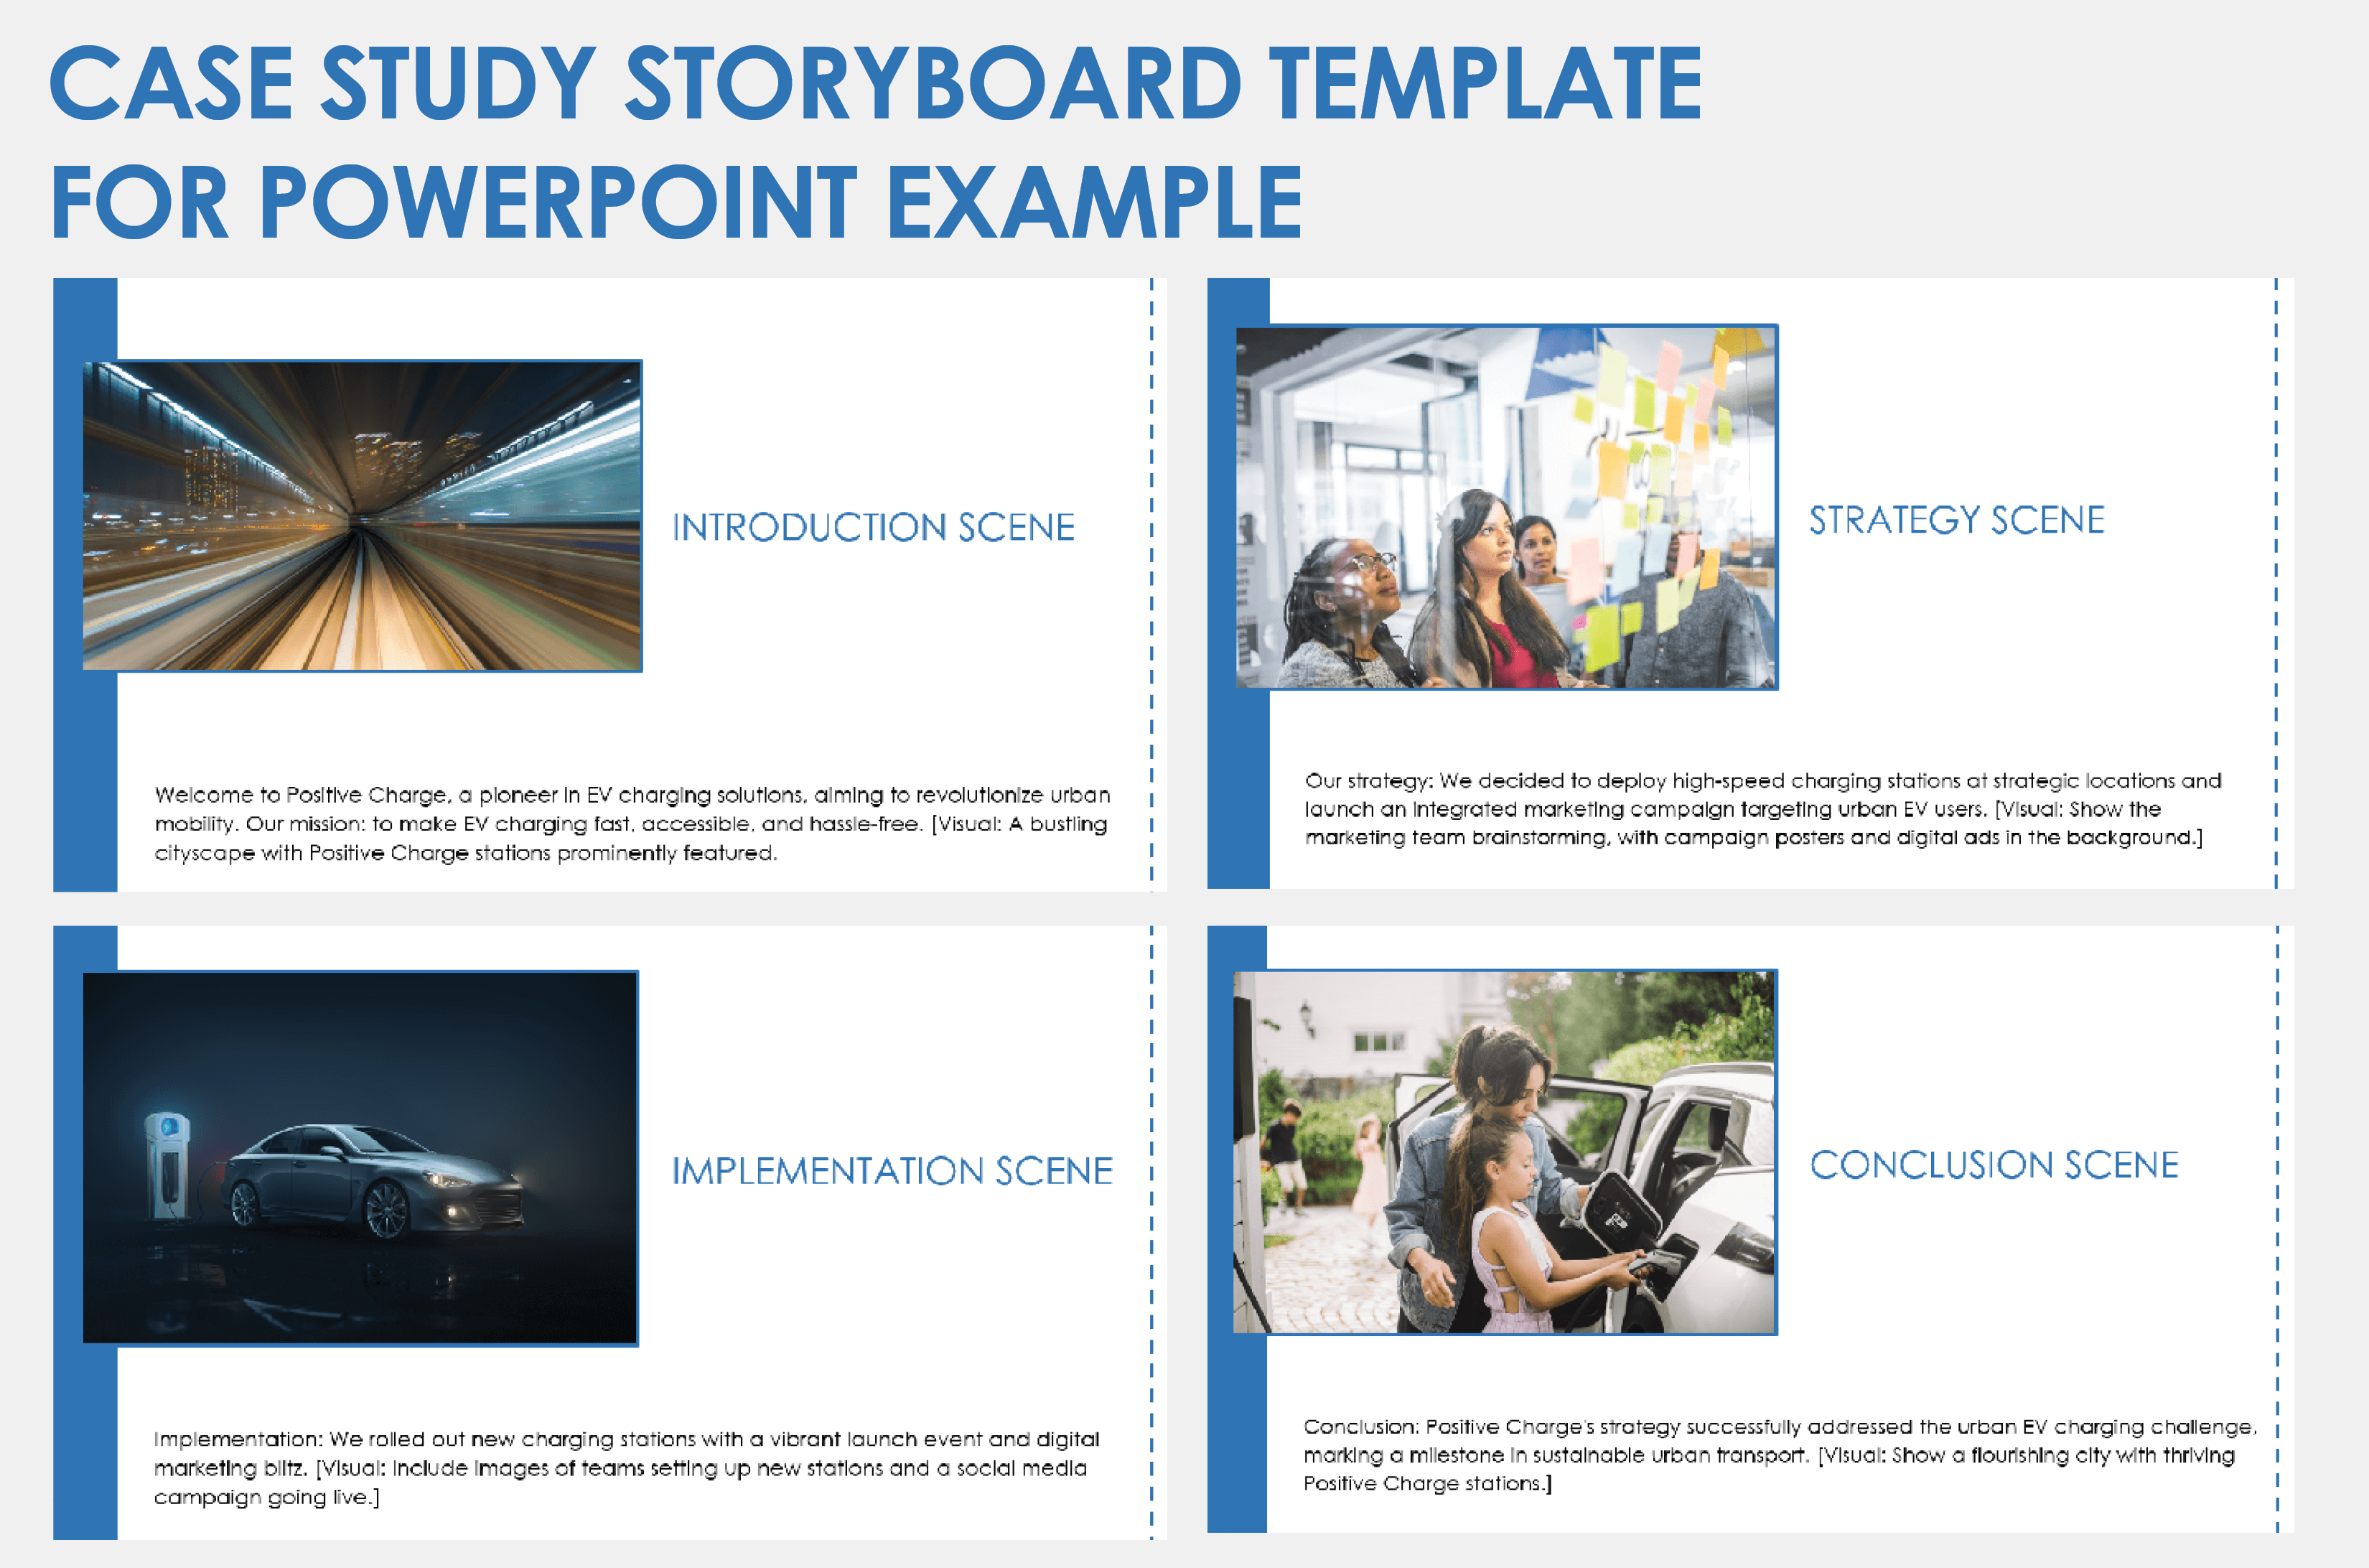 Customer Journey Case Study Example Template PowerPoint